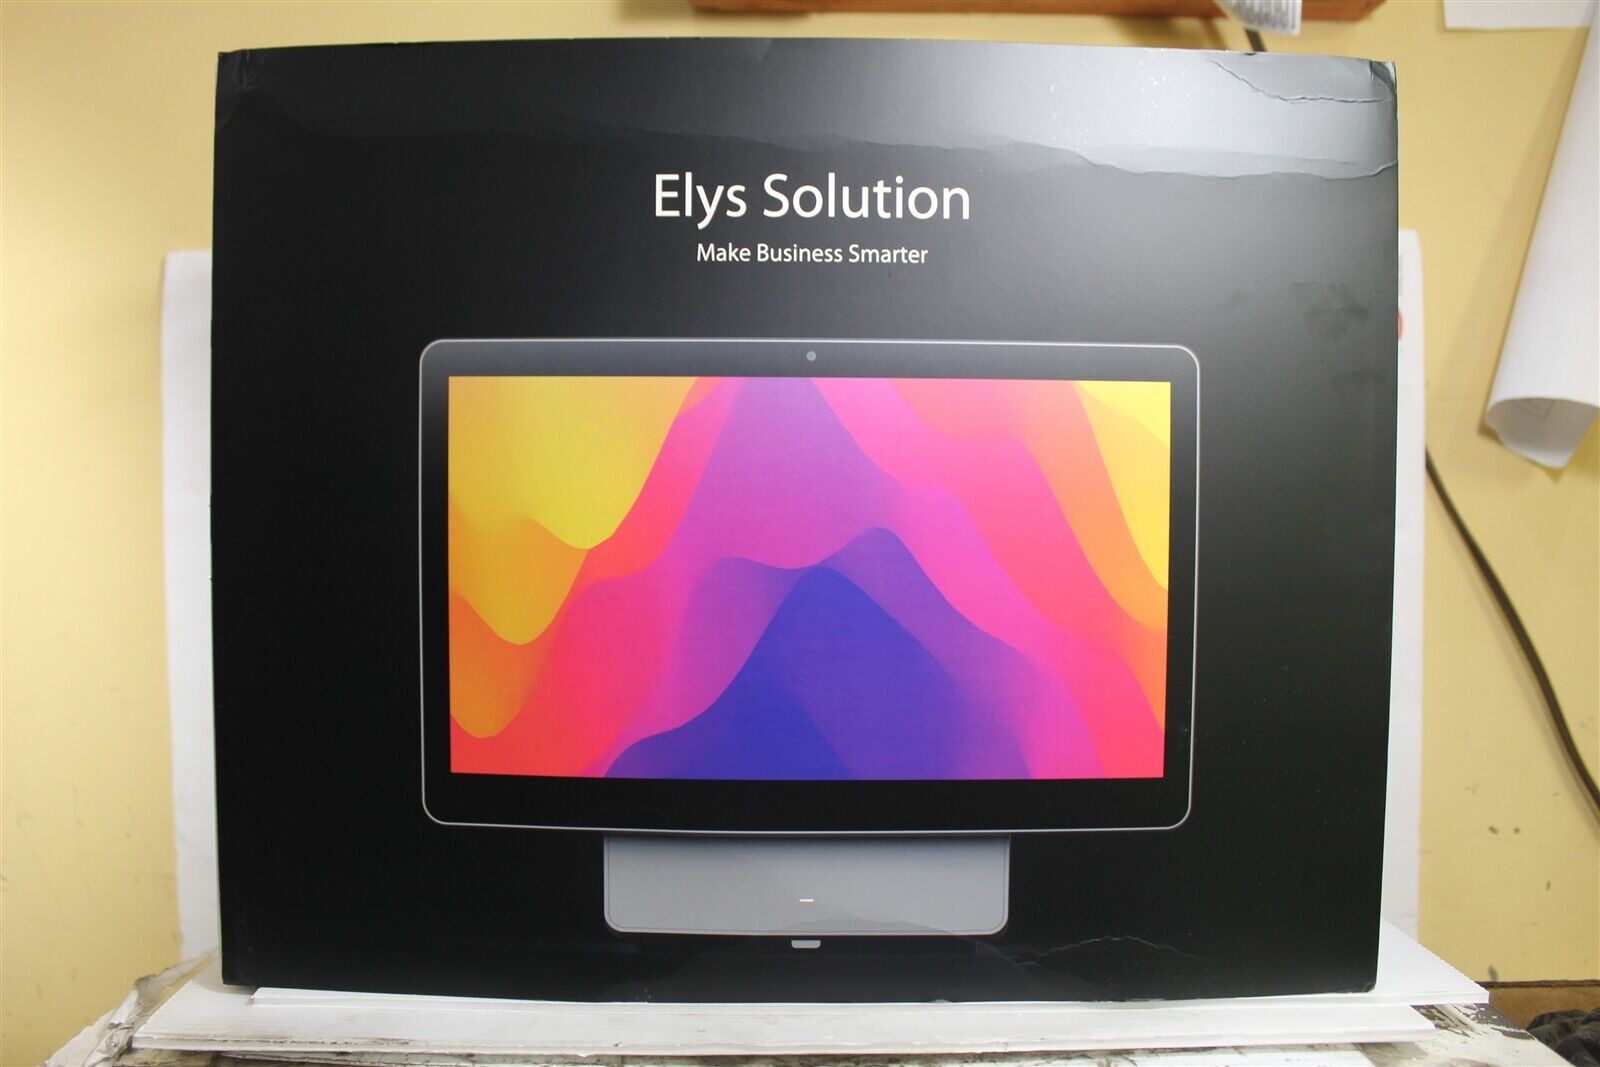 PAX TECHNOLOGY WORKSTATION COMPUTER L1400 - BRAND NEW-OPENED BOX-ANDROID TABLET 